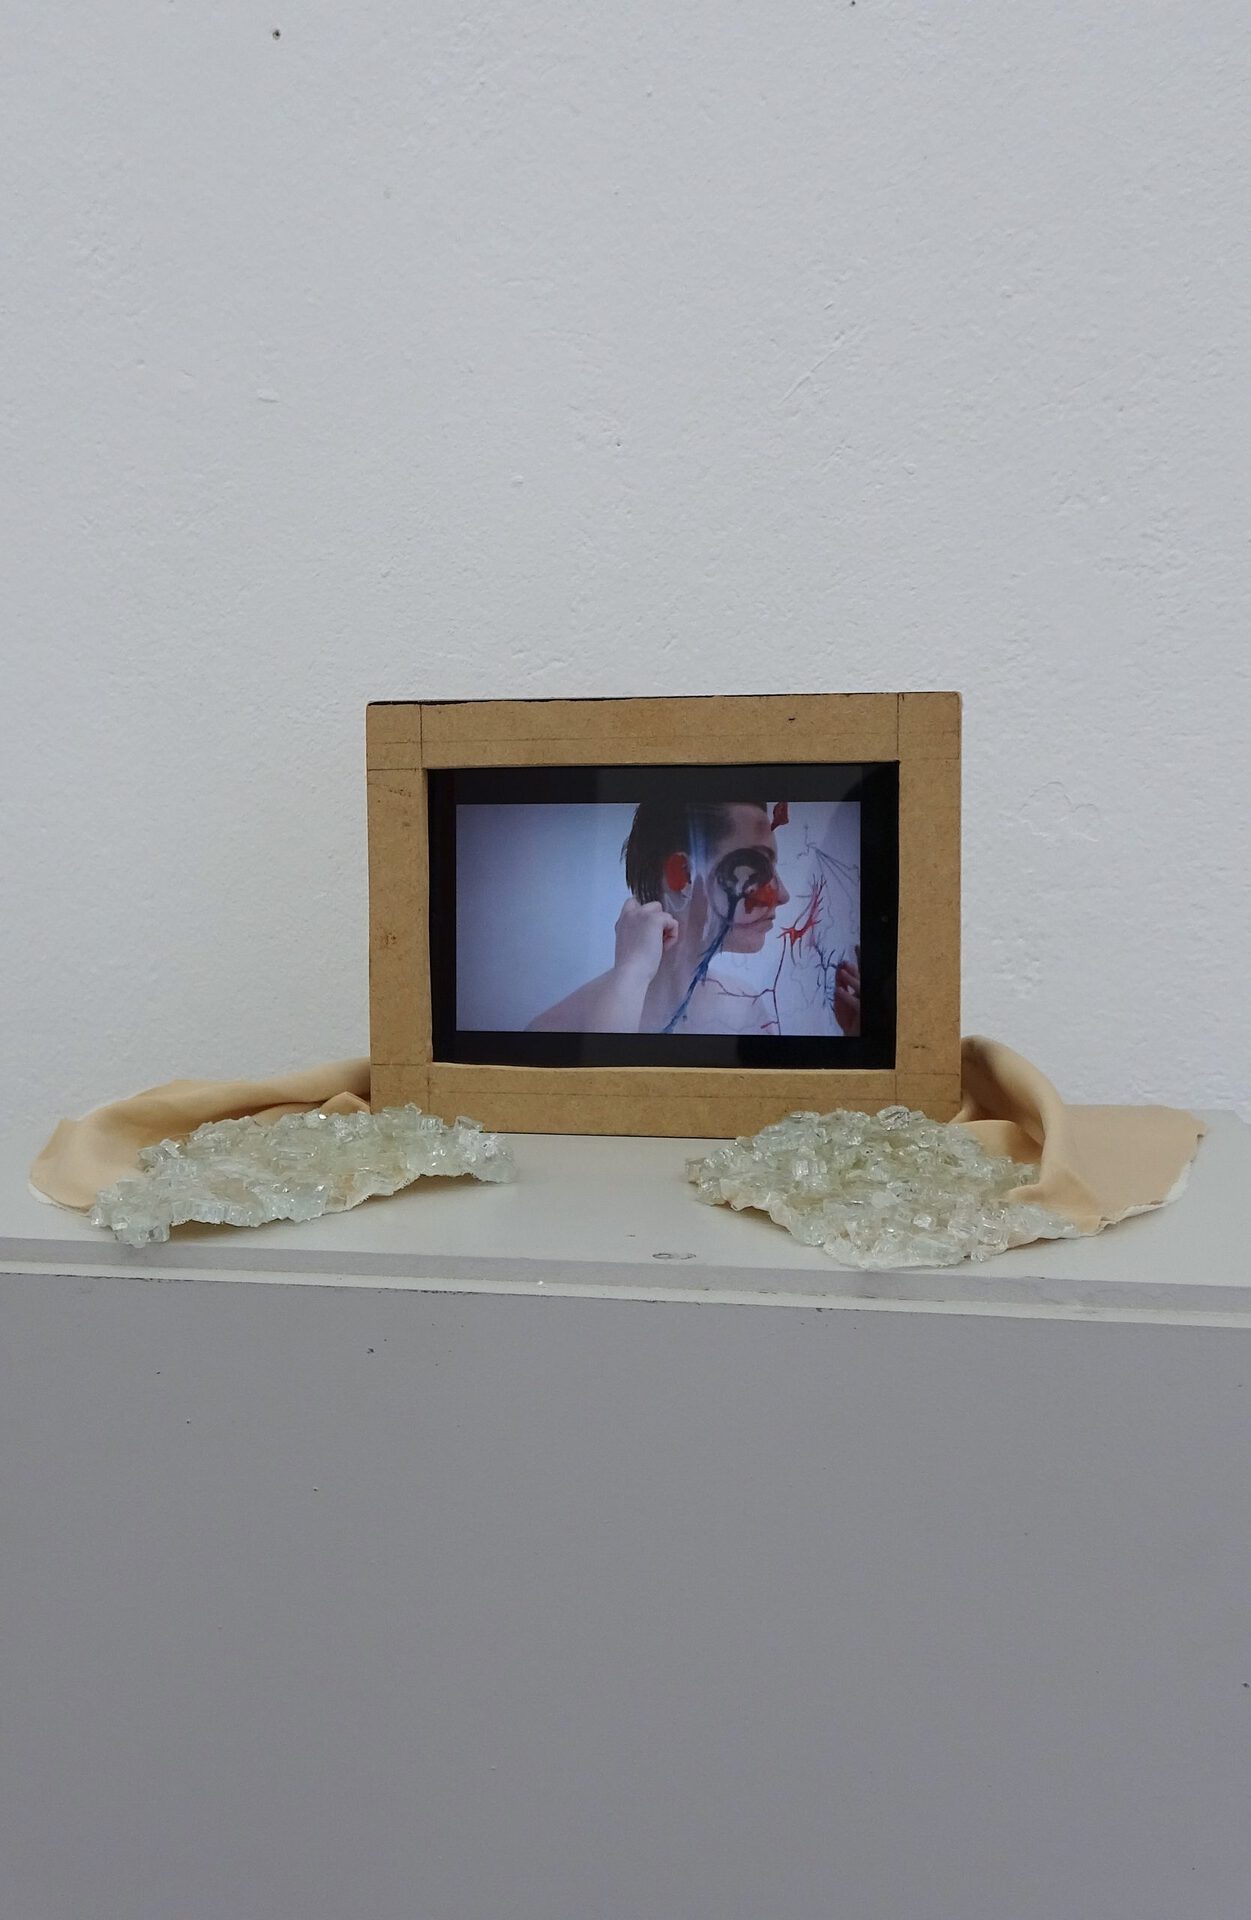 Monika Dorniak, Past Pieces Merging With What I Call Now, video installation with glass, wood and fabric, 30 x 20 x 5 cm